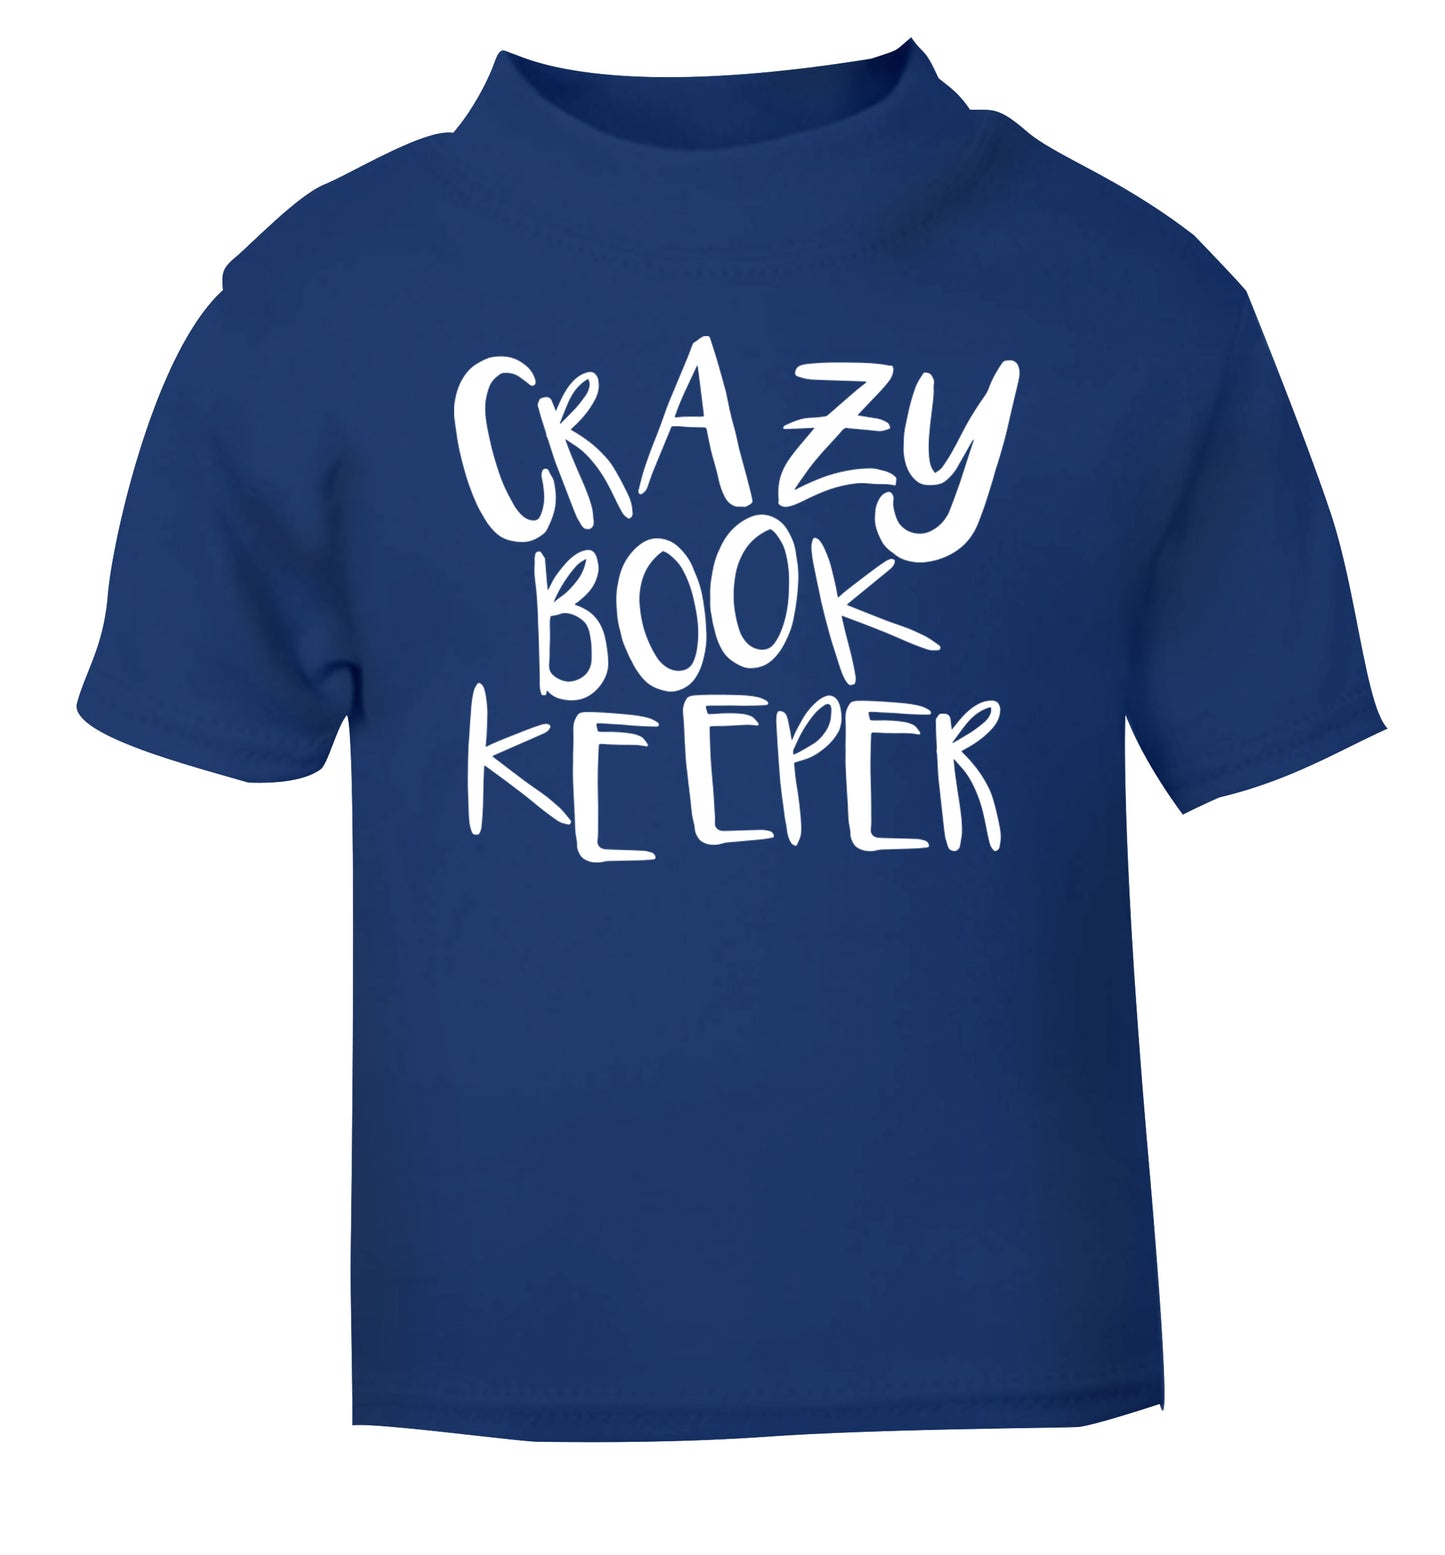 Crazy bookkeeper blue Baby Toddler Tshirt 2 Years